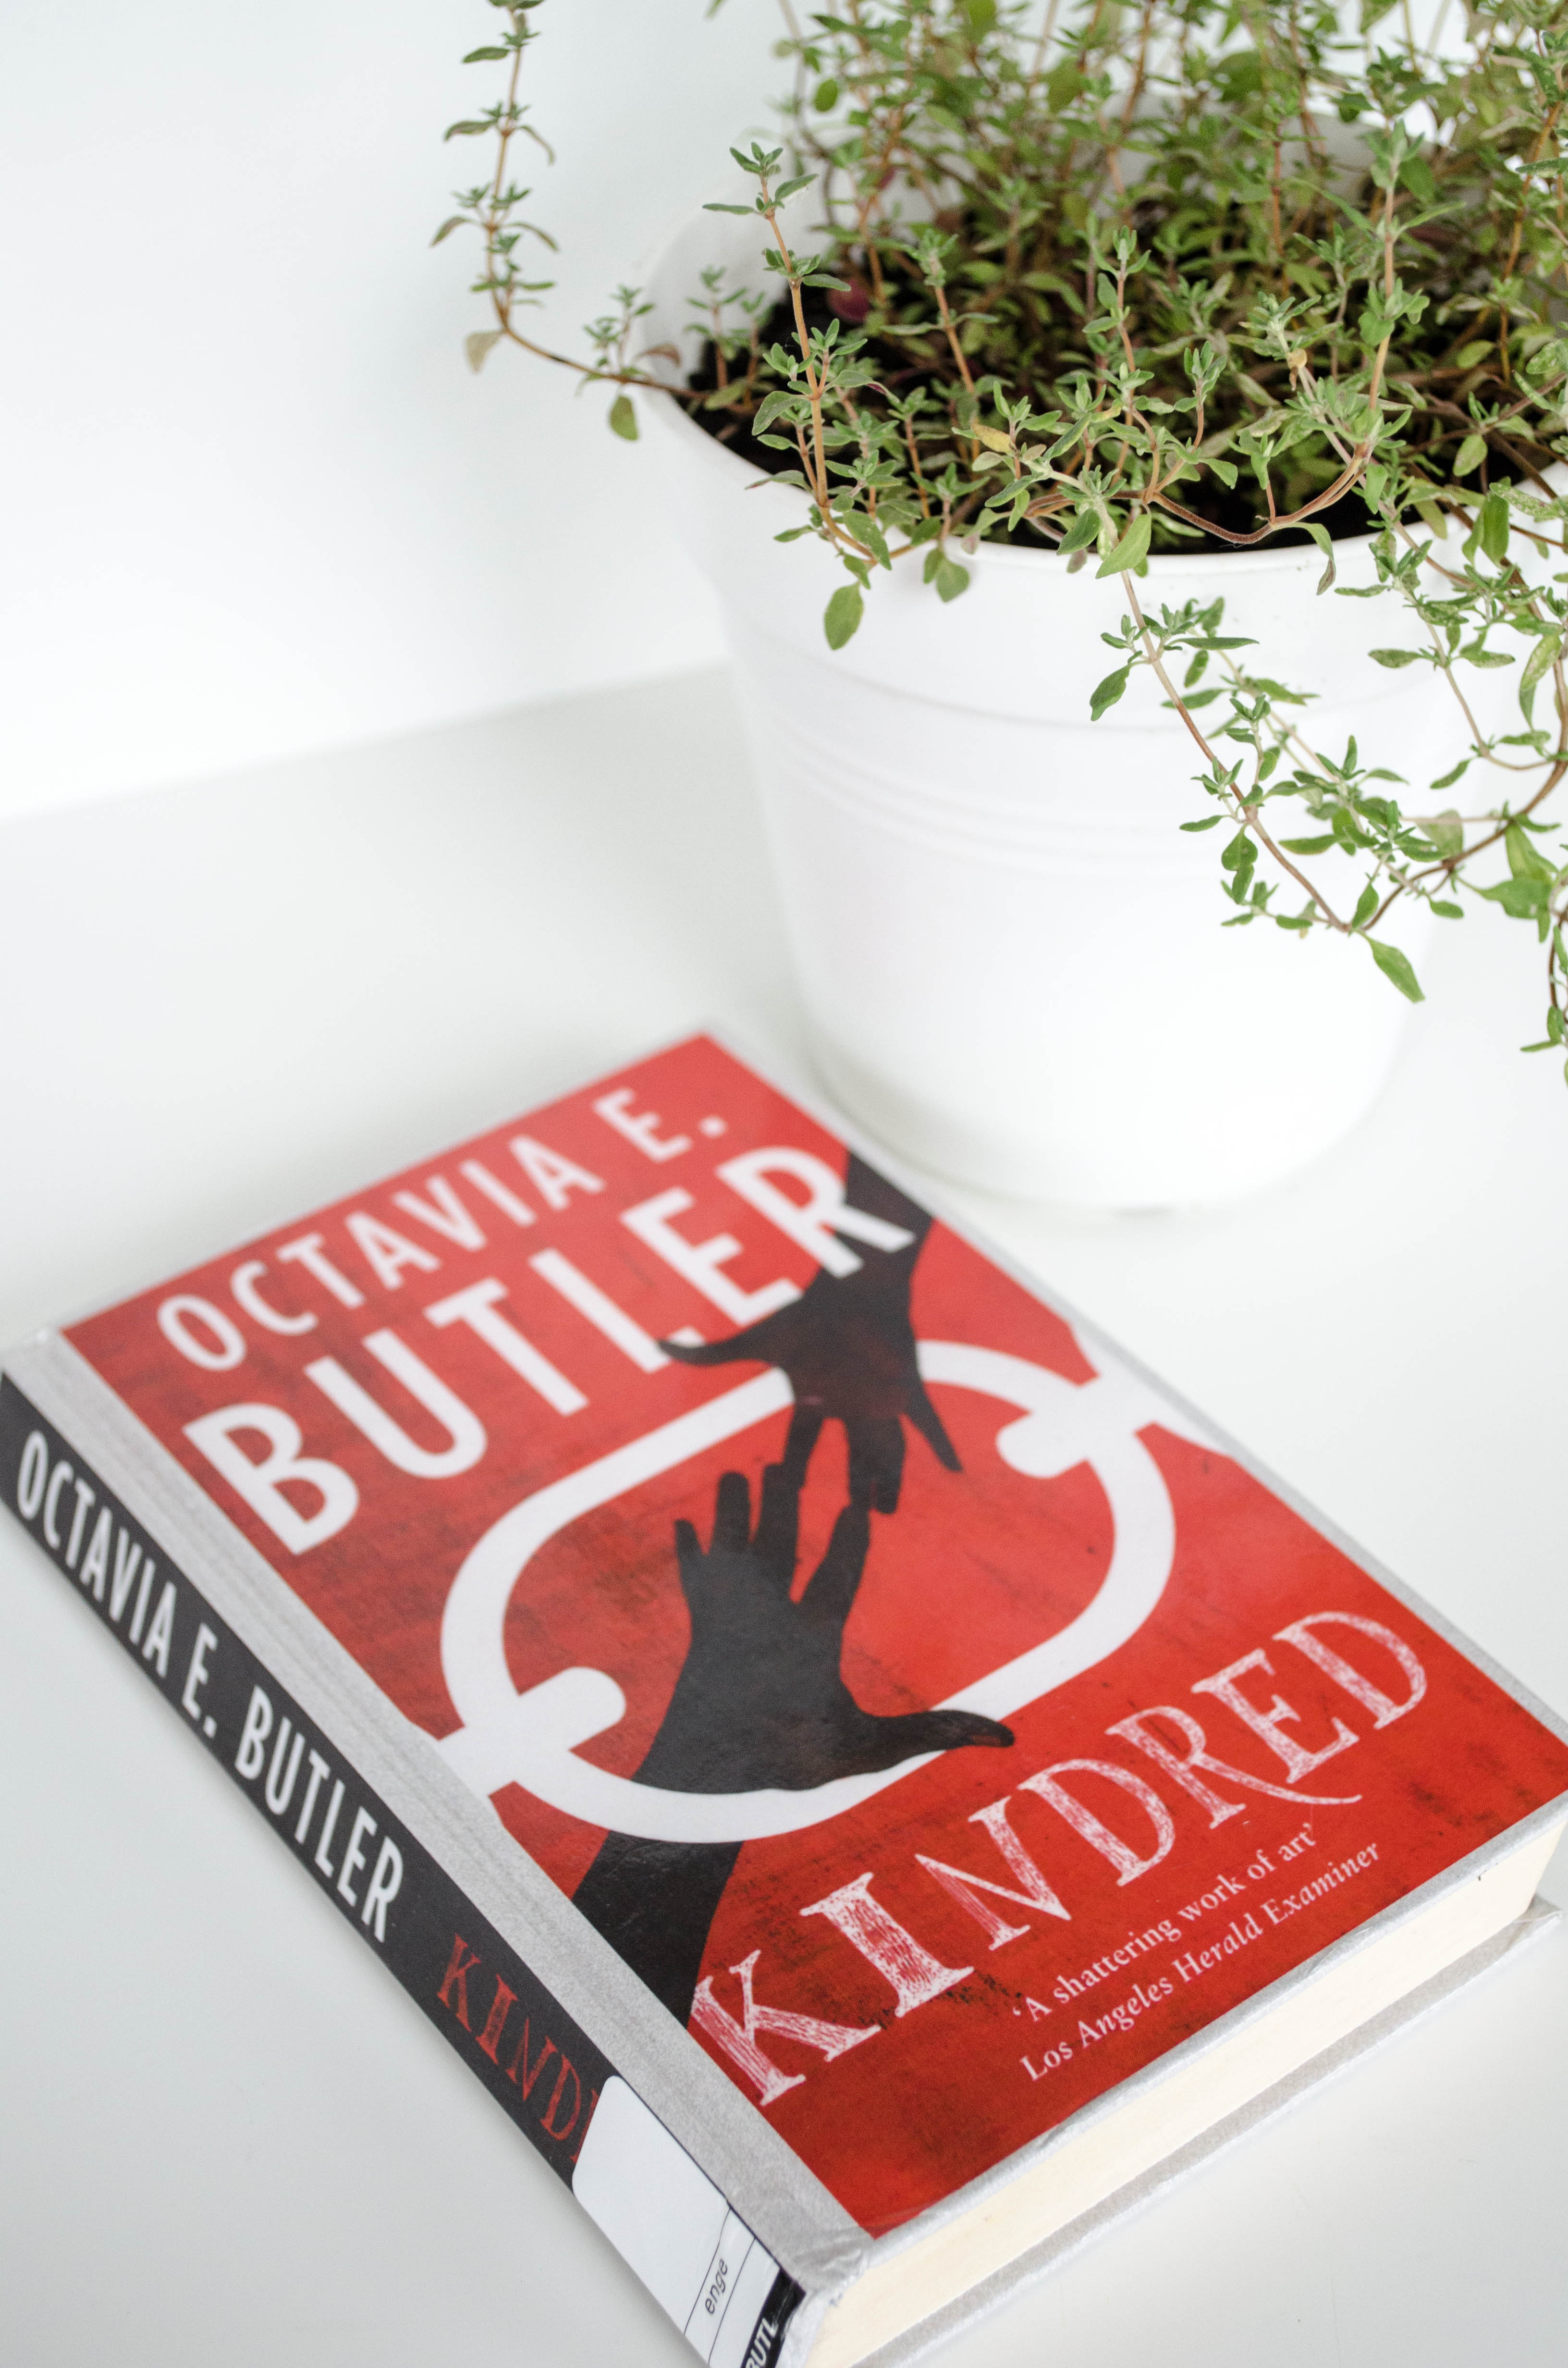 Kindred, by Octavia E. Butler, tells the gripping story of Dana, a black woman sent back in time to save her white, slave-owning ancestor.